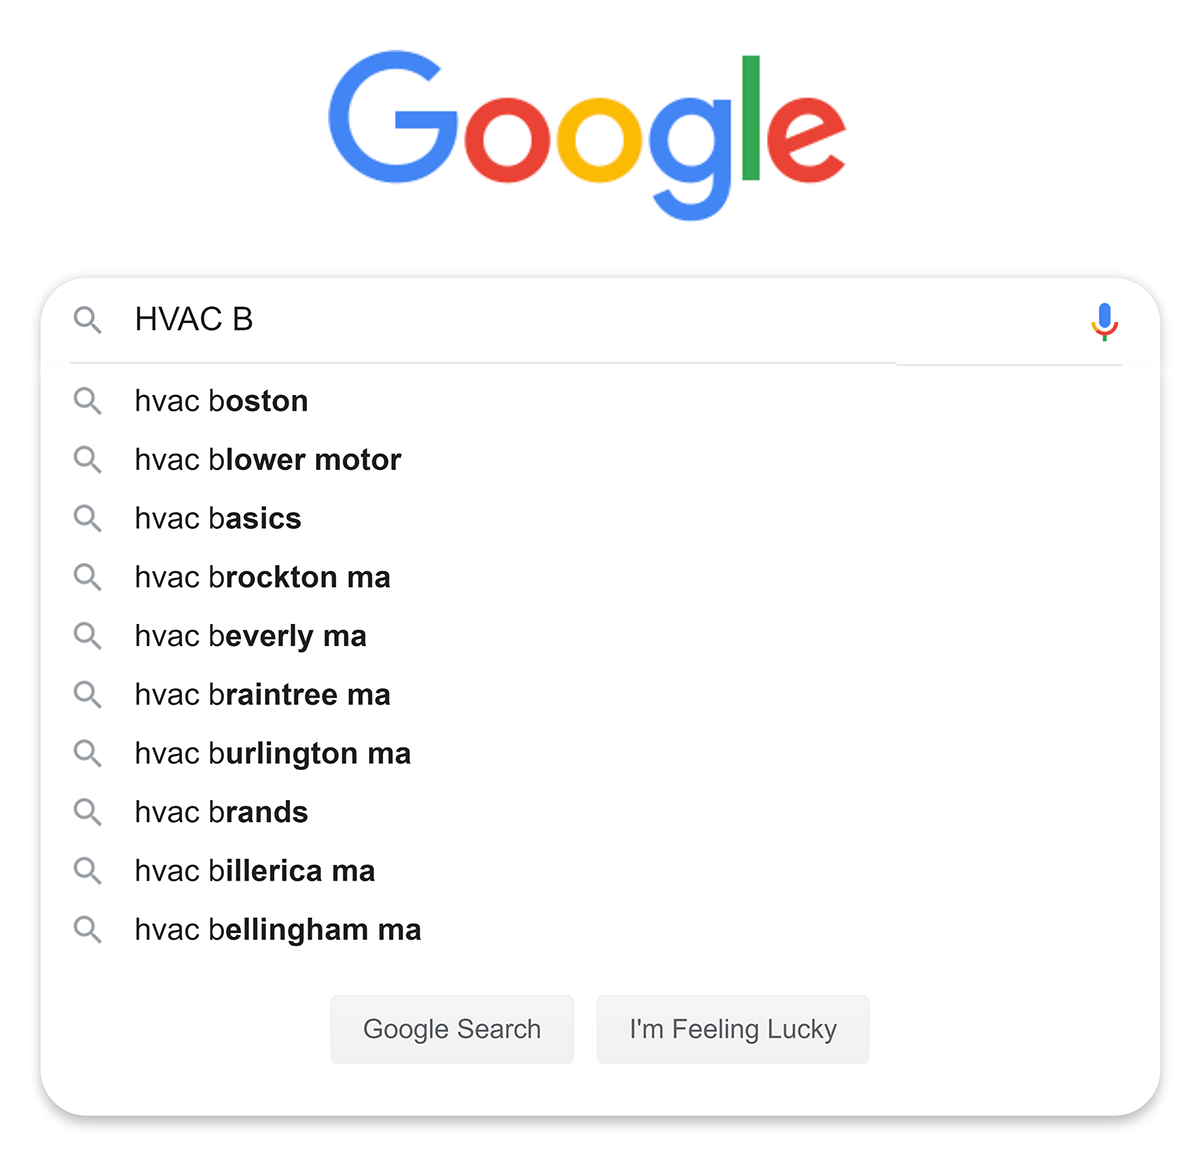 Google suggestions for local "HVAC B" search